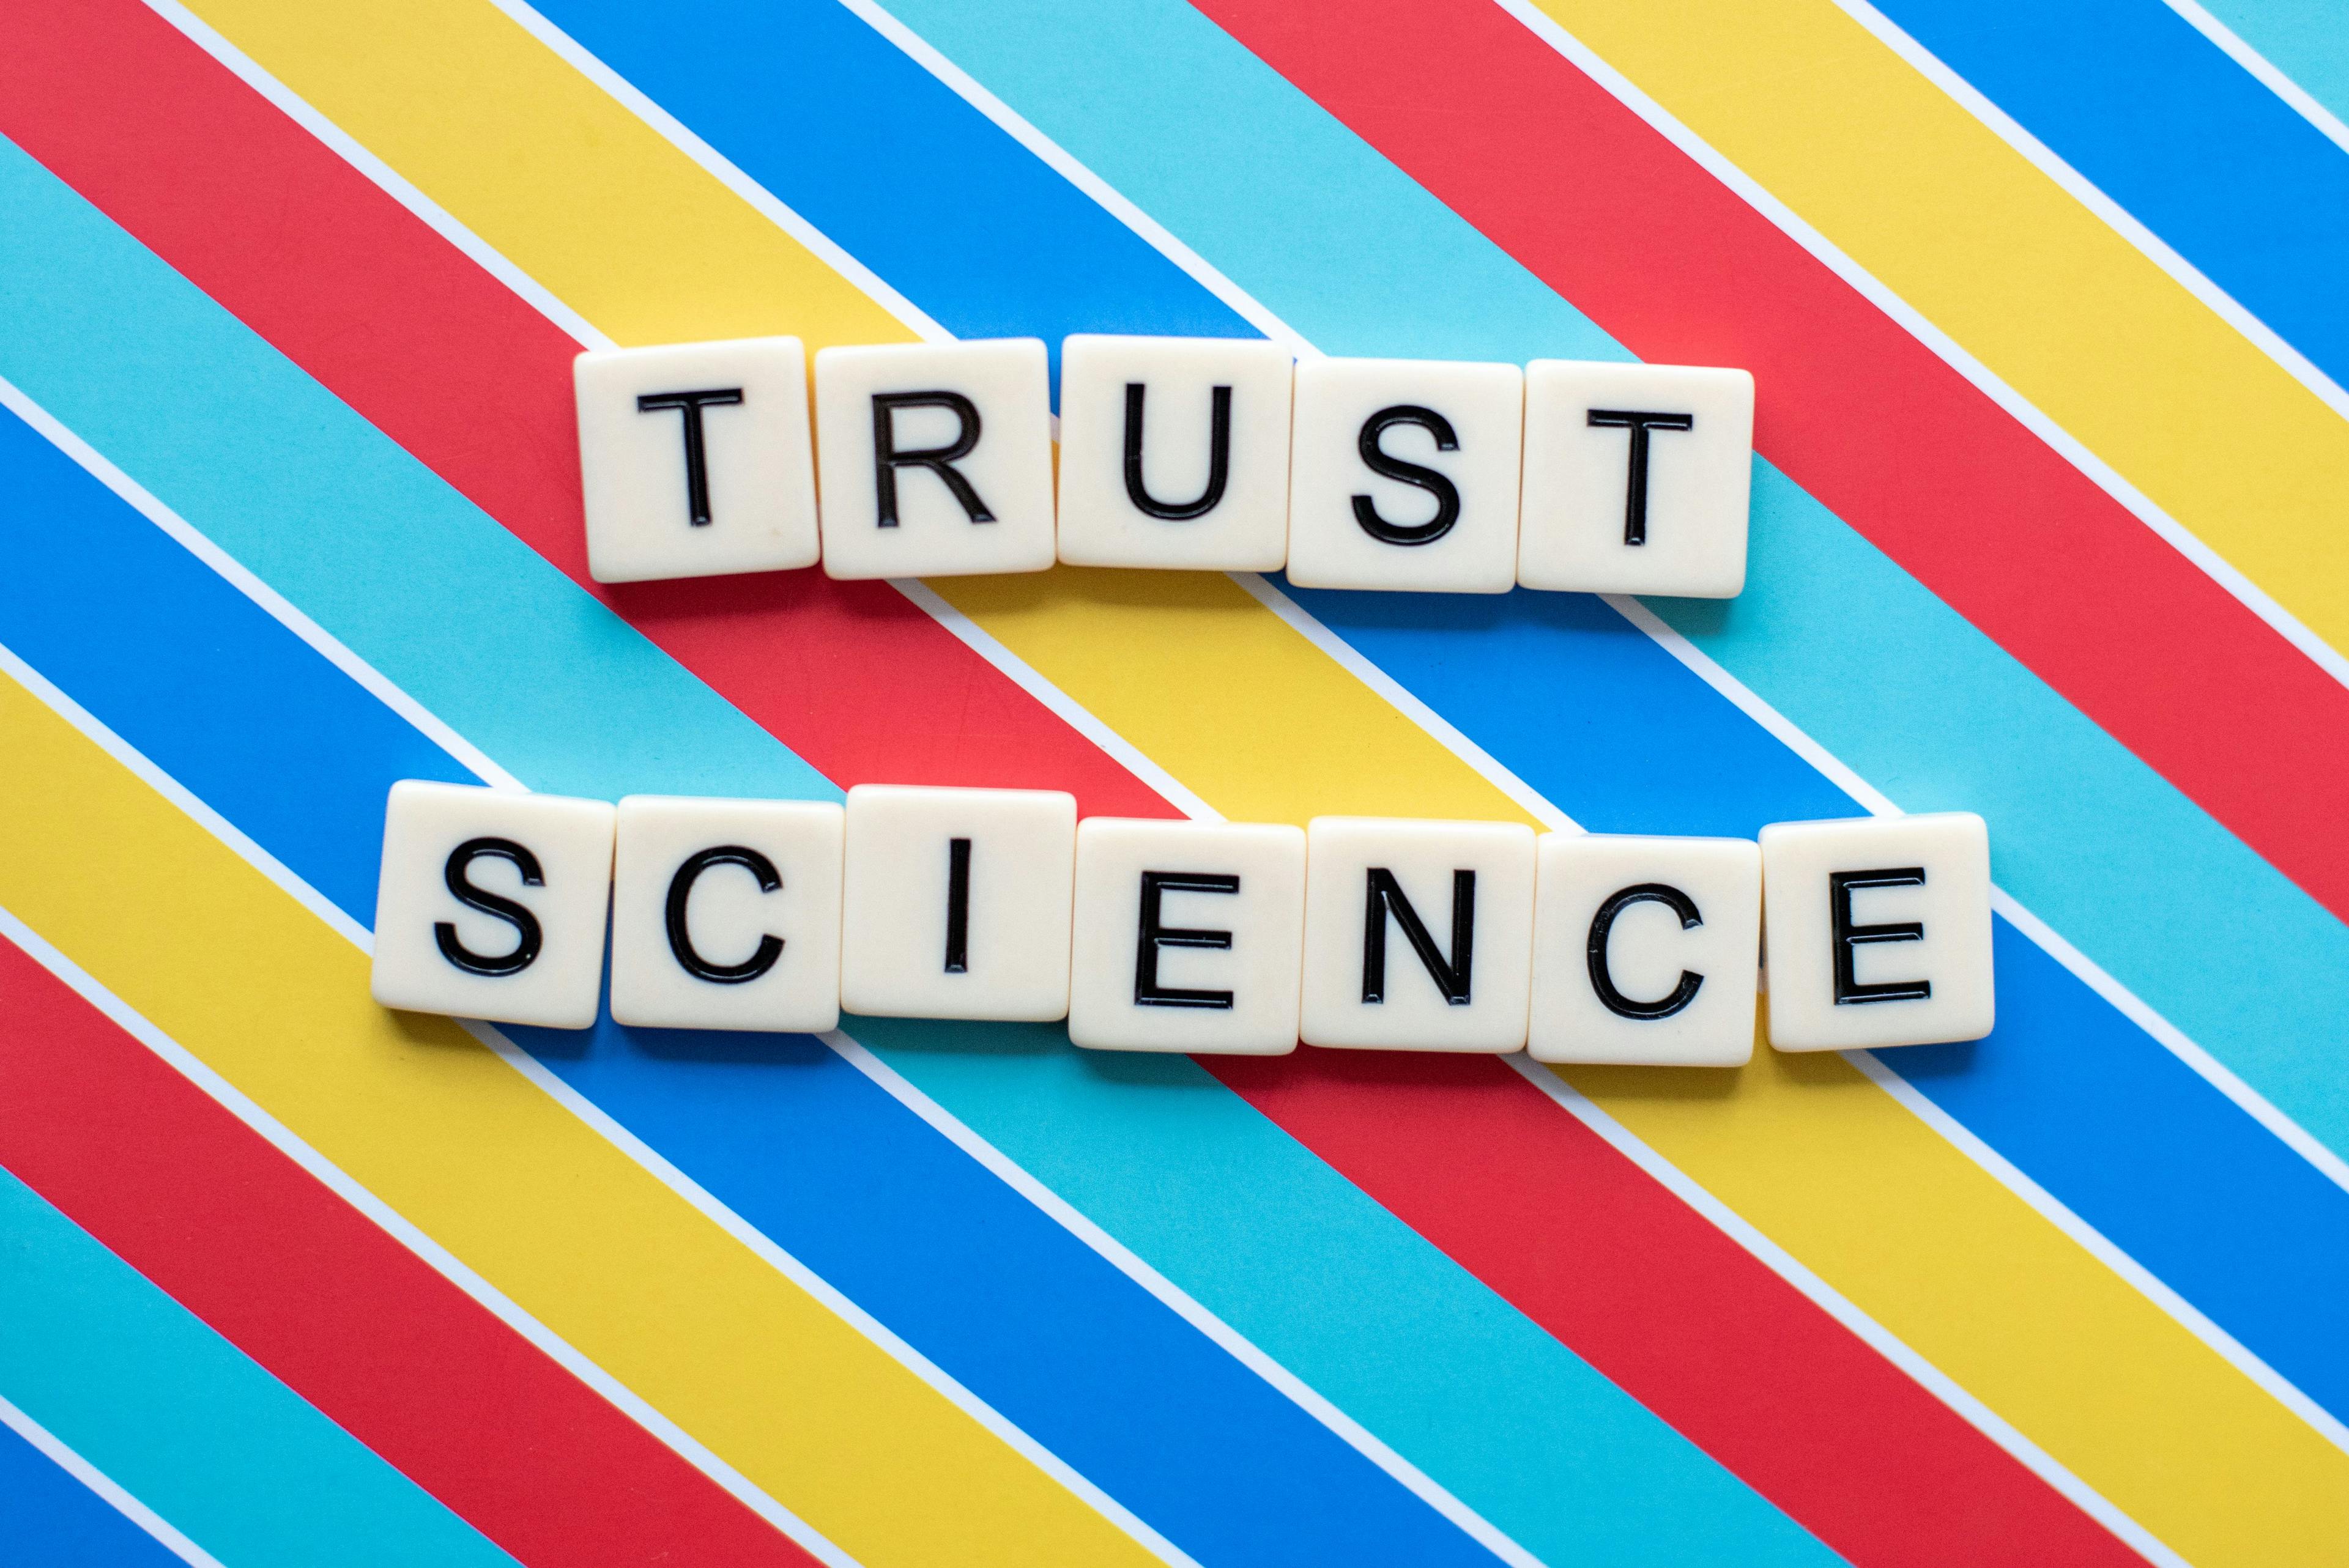 Trust in Science Increased During the COVID-19 Pandemic, but Became More Polarized